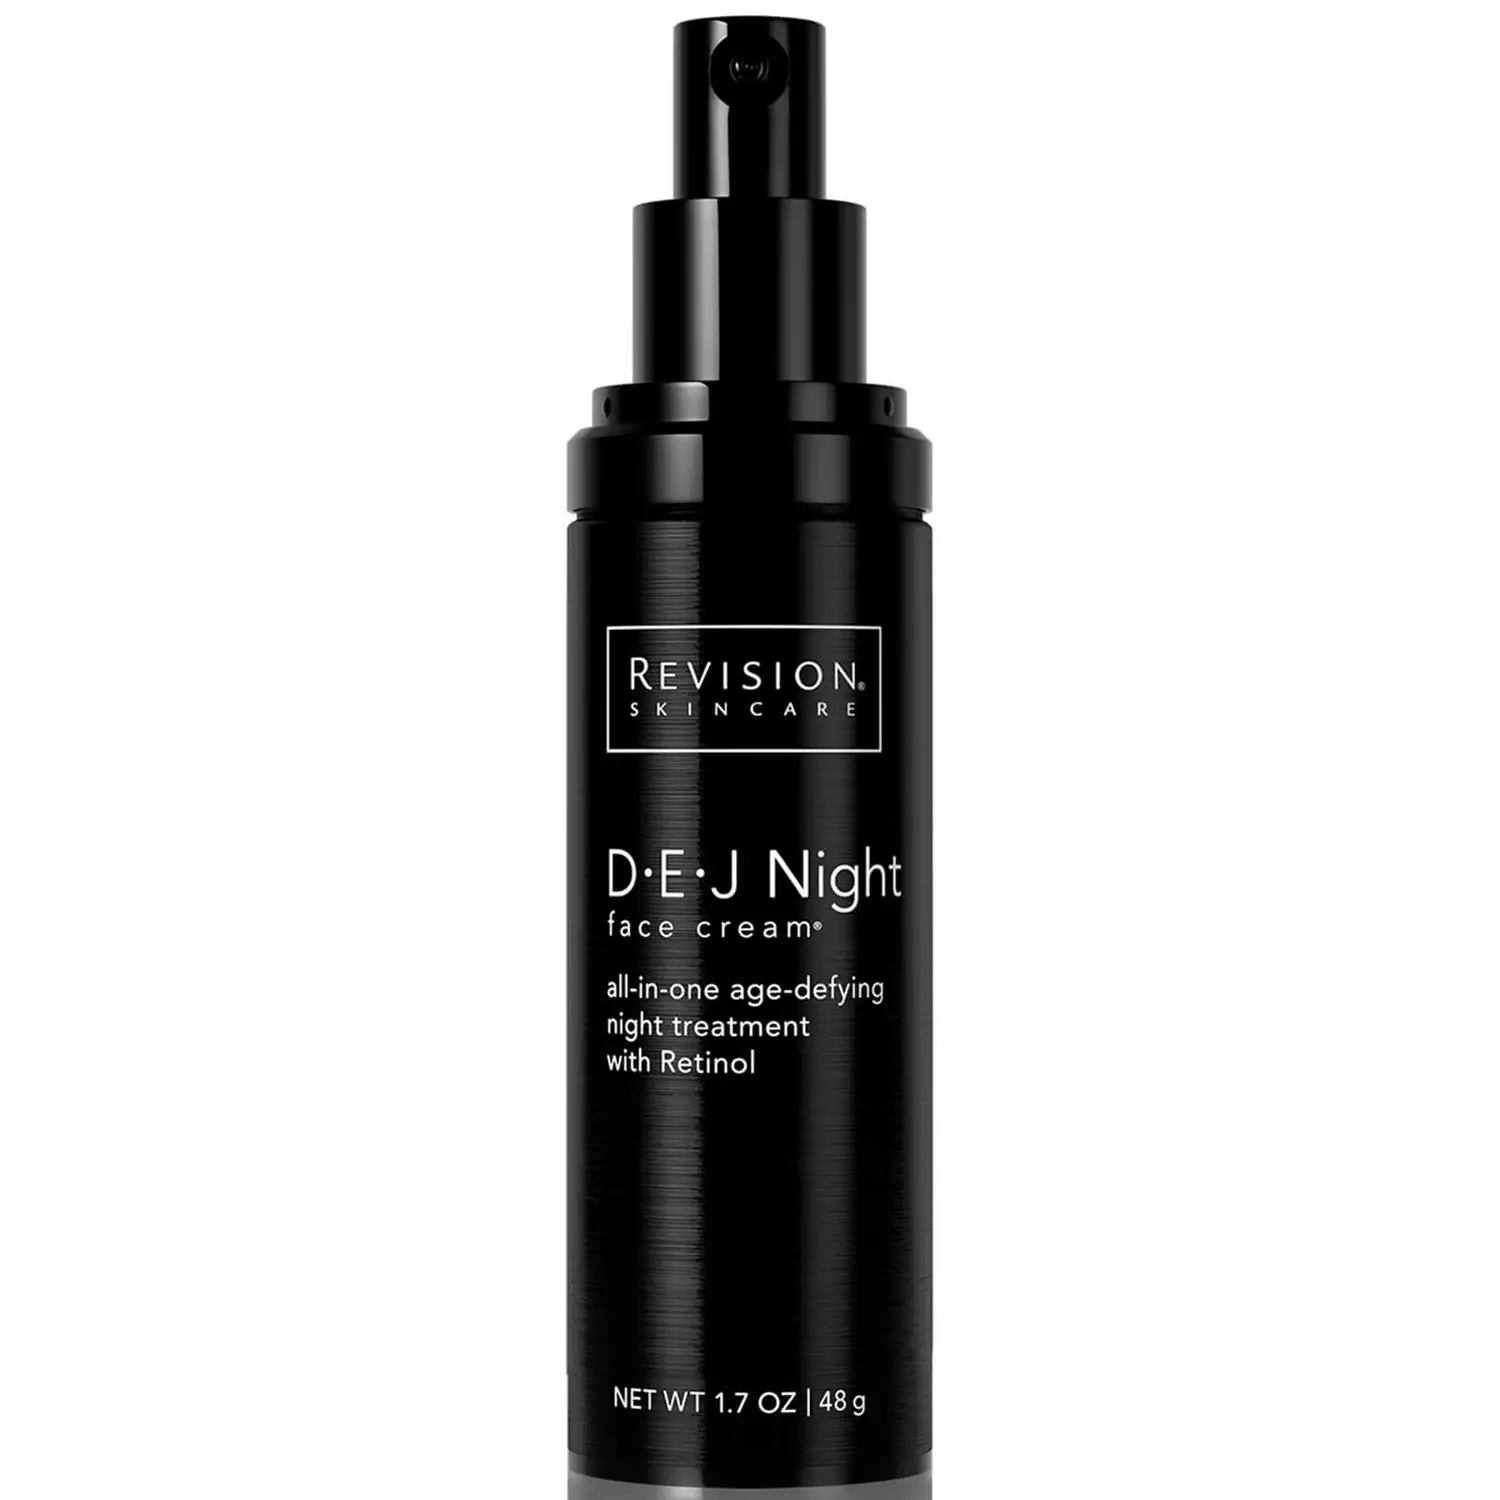 D·E·J Night Face Cream® from Revision